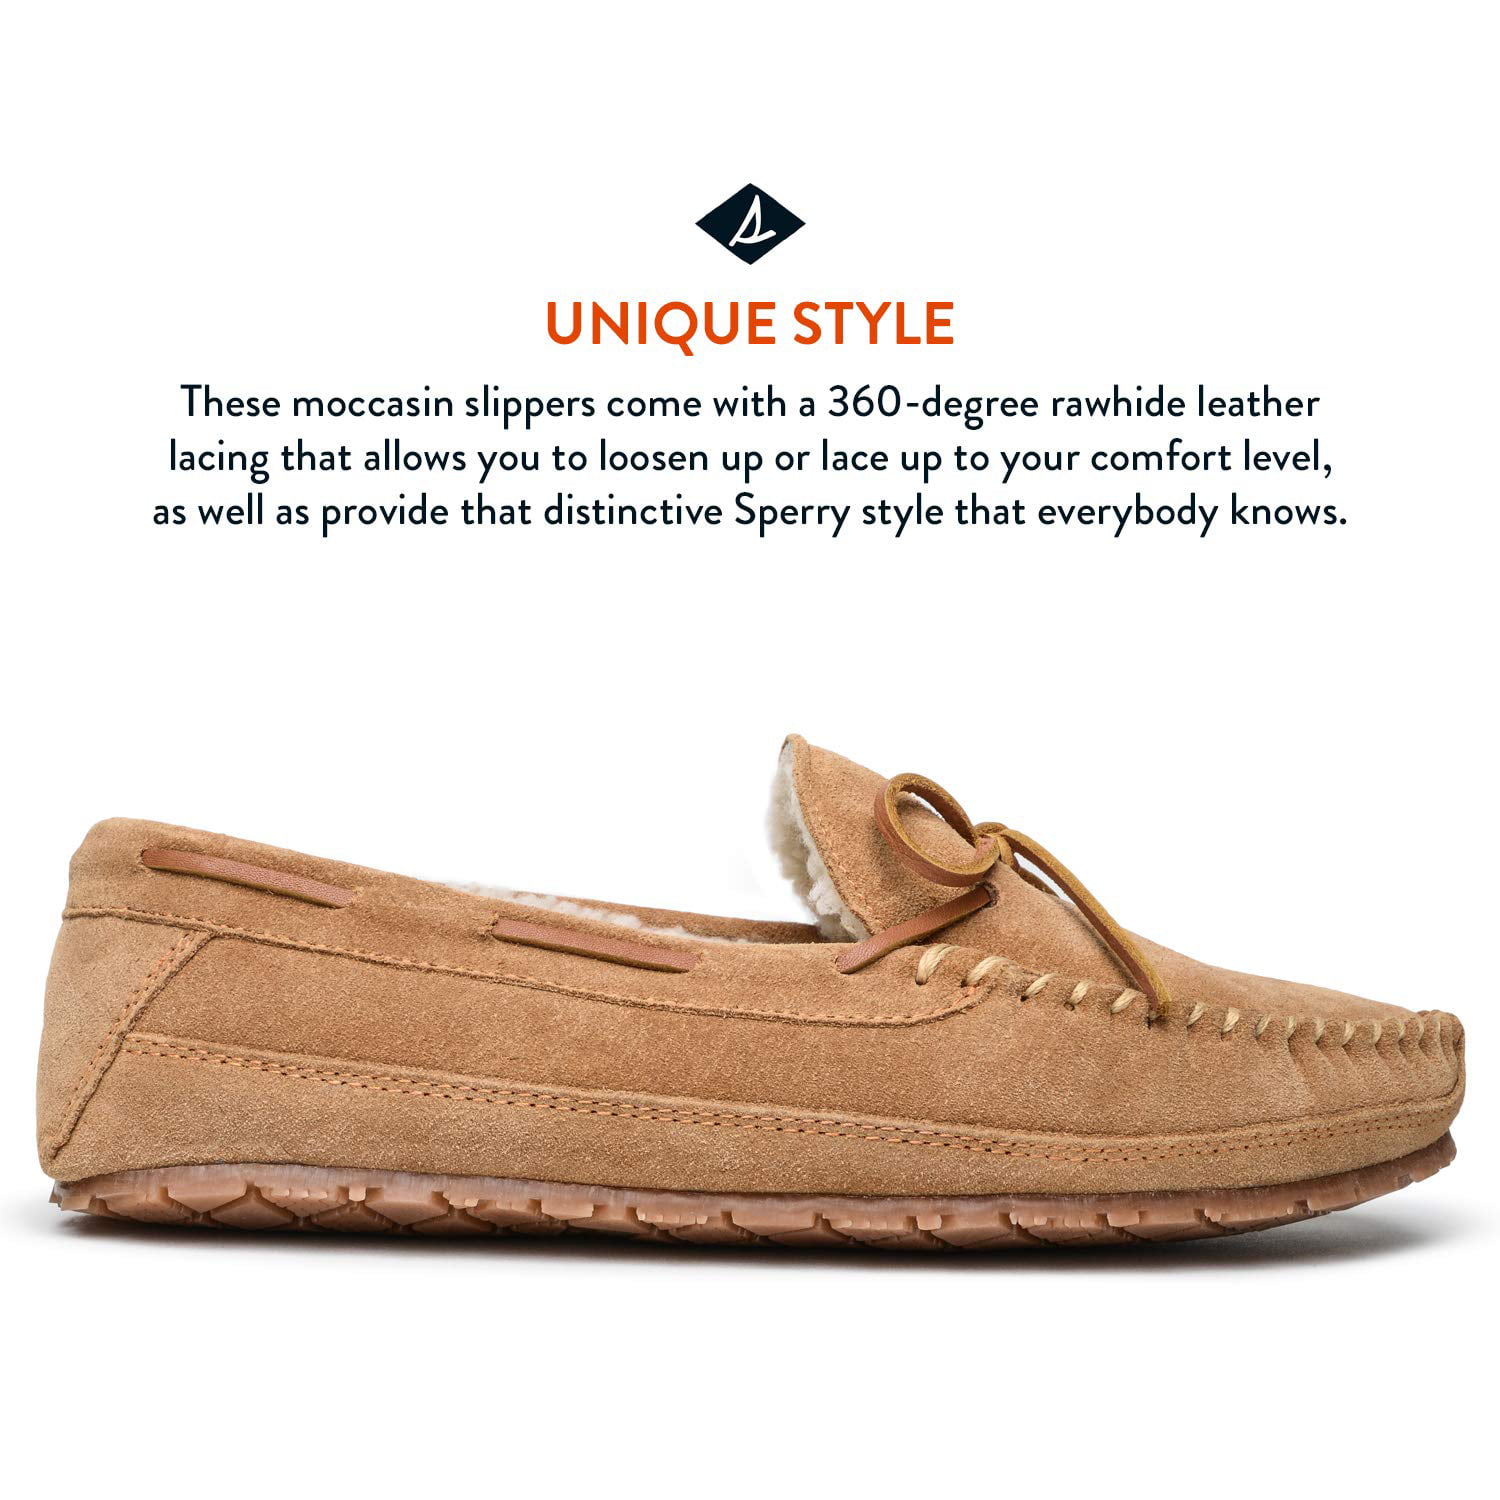 Sperry Men's Trapper Moccasin Slippers with Rawhide Leather Lacing 